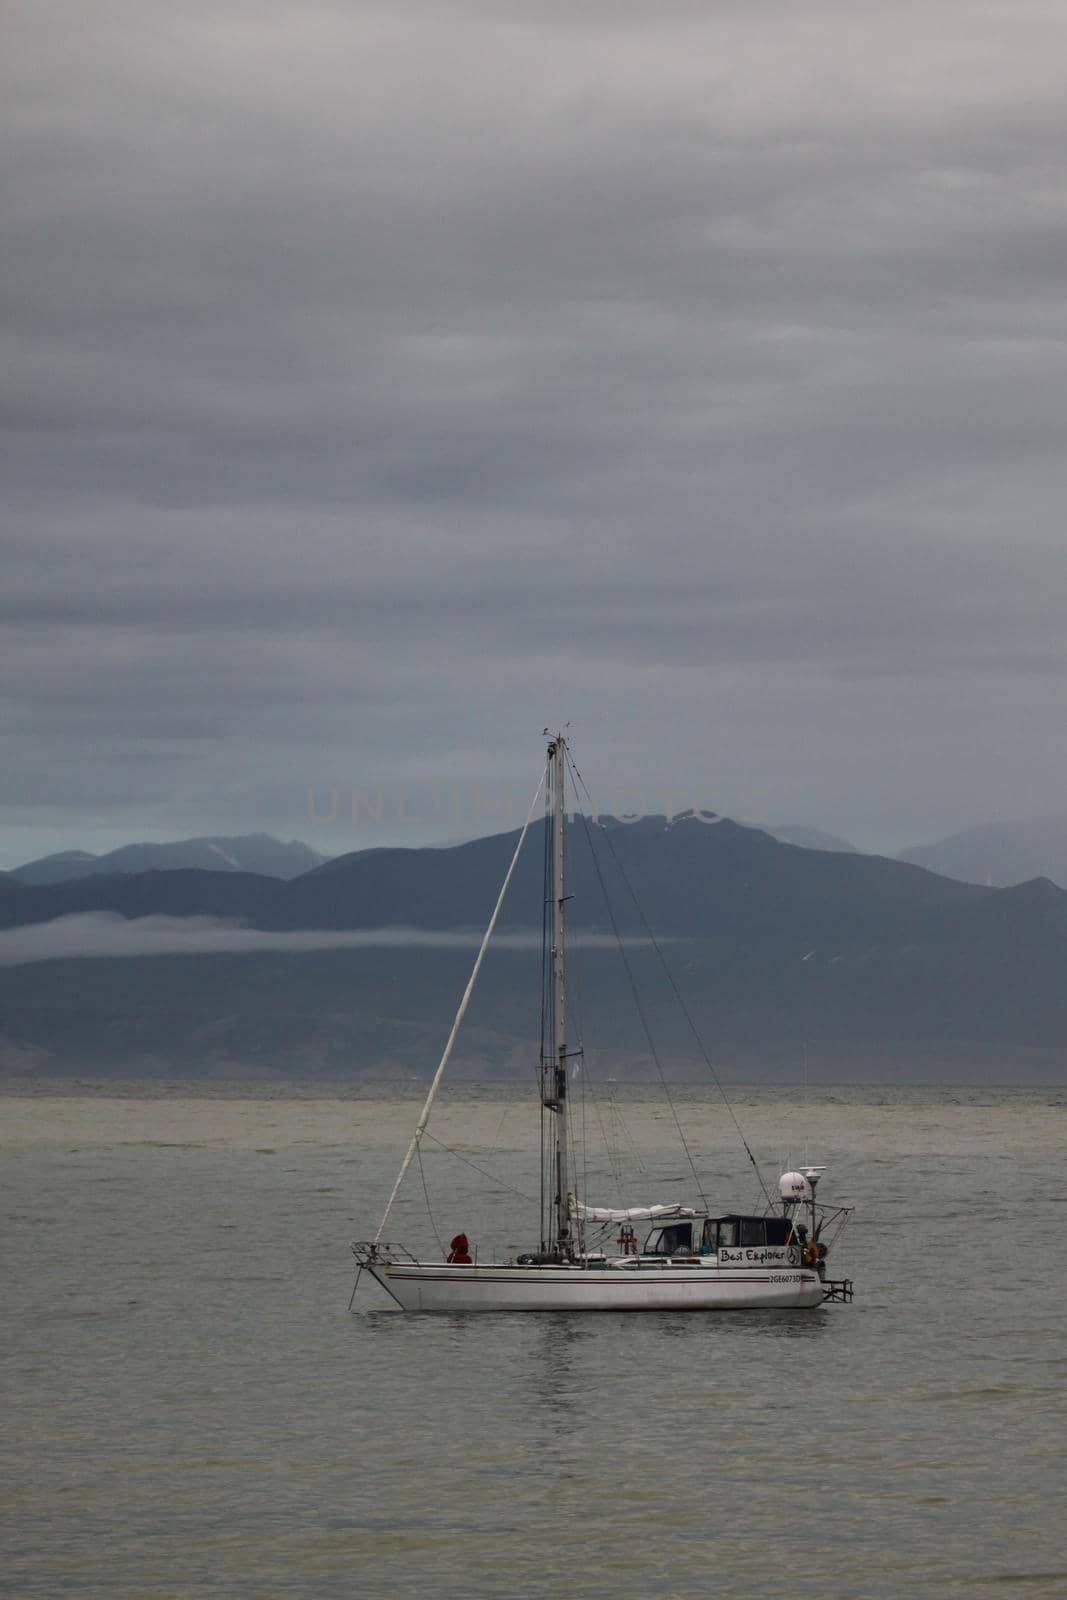 A sailboat anchored near Pond Inlet, Nunavut waiting for weather to transit through the Northwest Passage by Granchinho